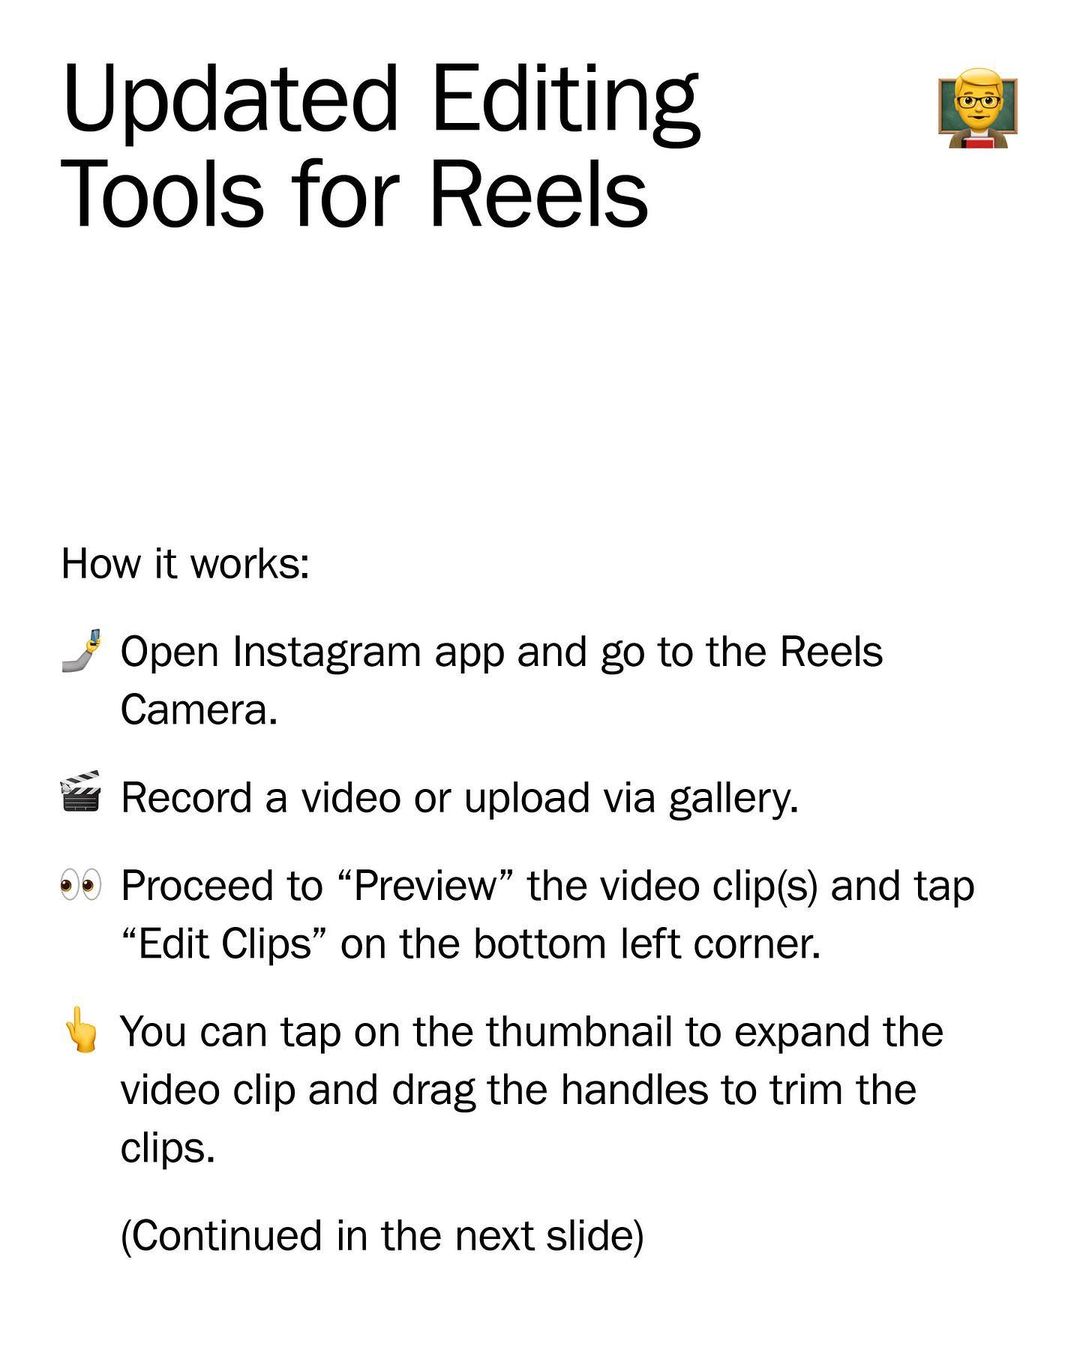 updated tools for reels